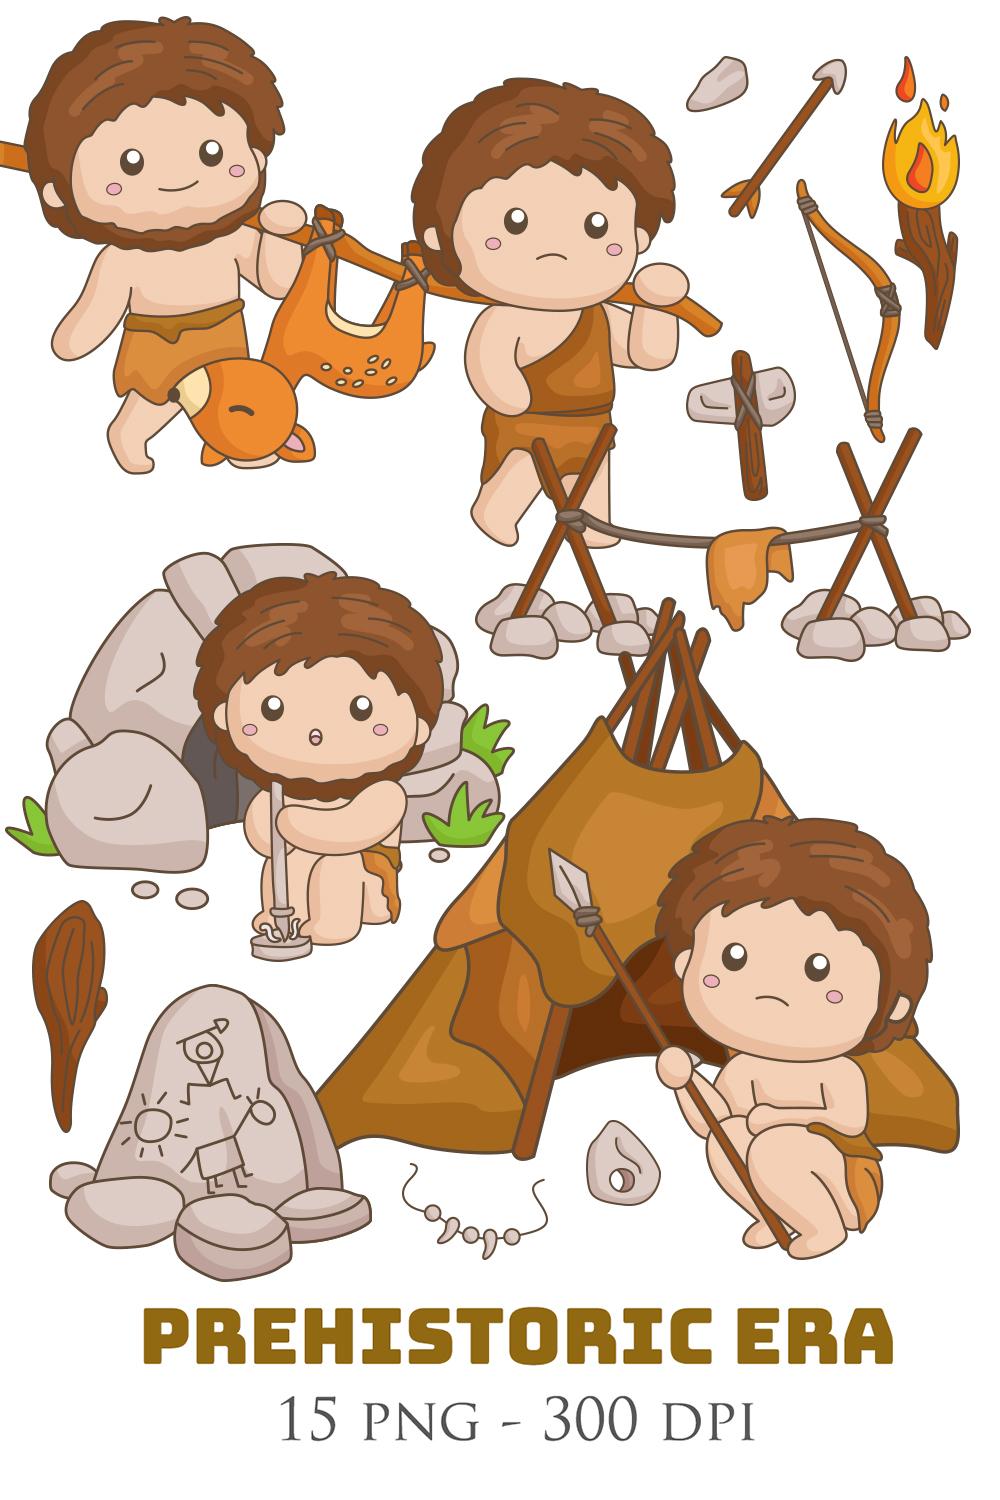 Cute Funny Ancient Human People Activity Prehistoric Era World Period History Discovery Cartoon Illustration Vector Clipart Sticker pinterest preview image.